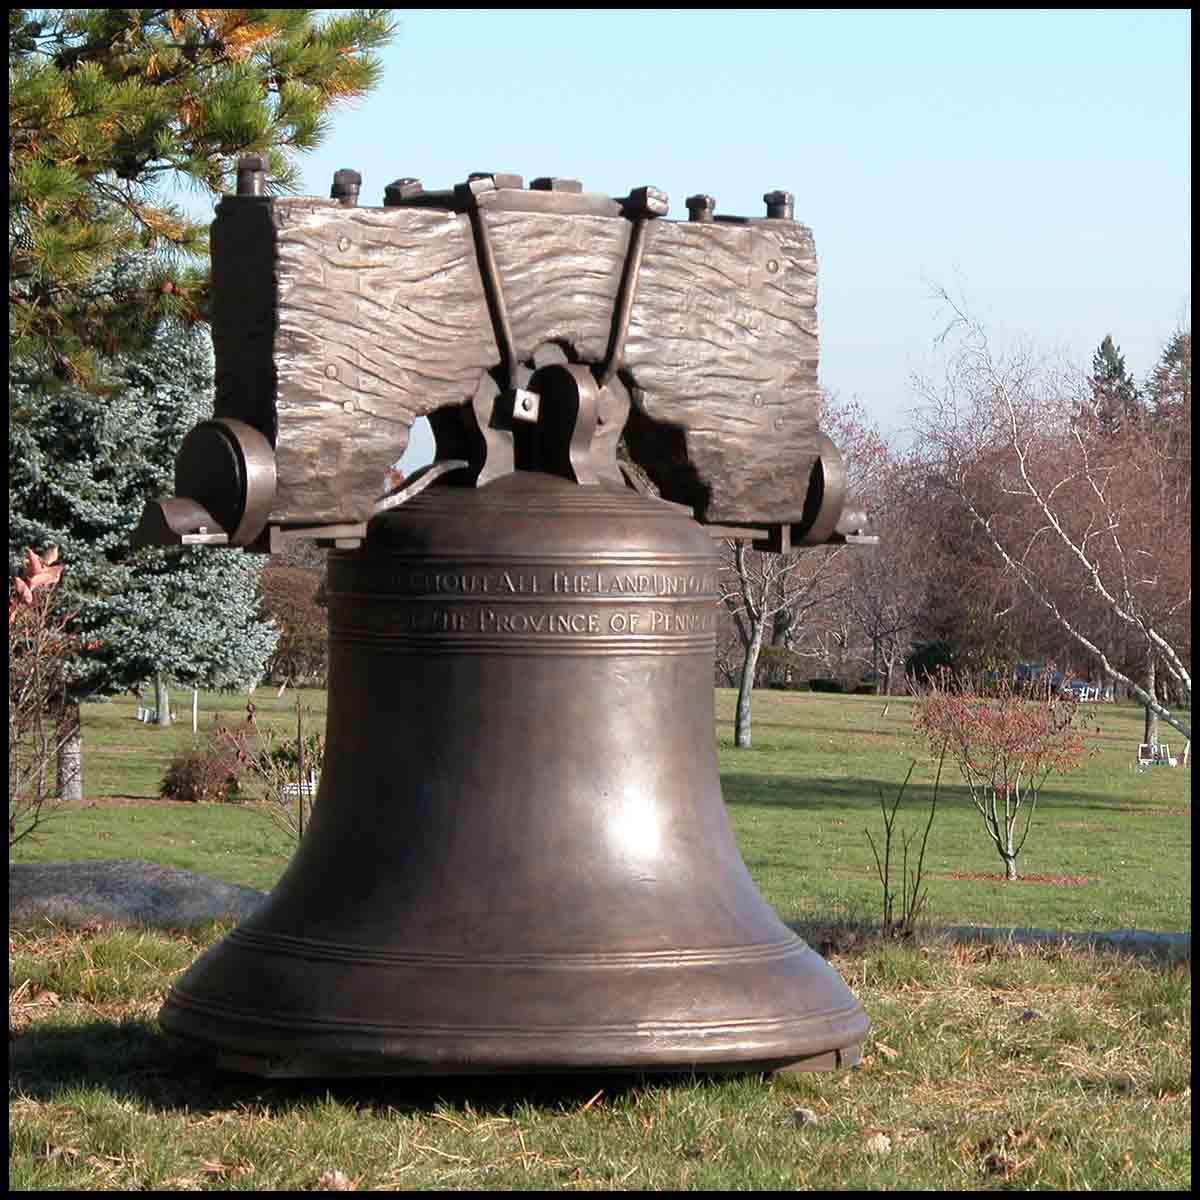 photo of bronze-colored Liberty Bell with yoke in field with trees in background